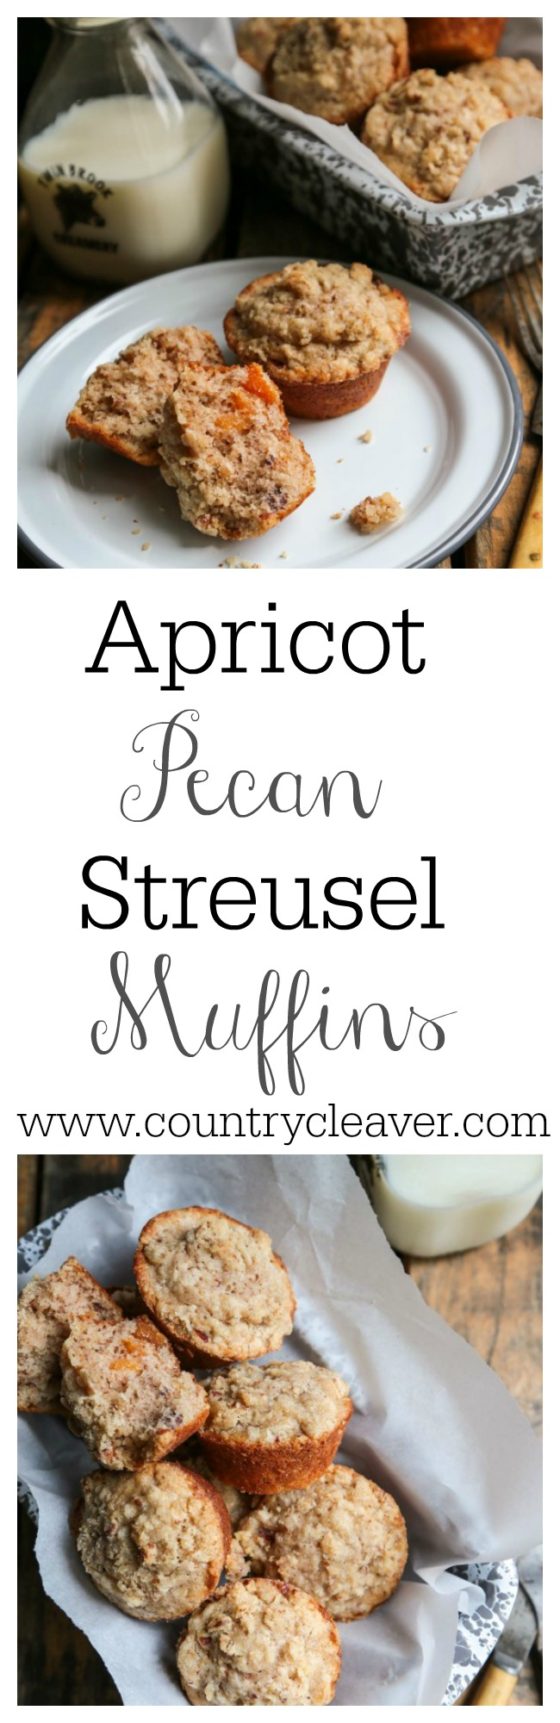 Apricot Pecan Streusel Muffins--www.countrycleaver.com